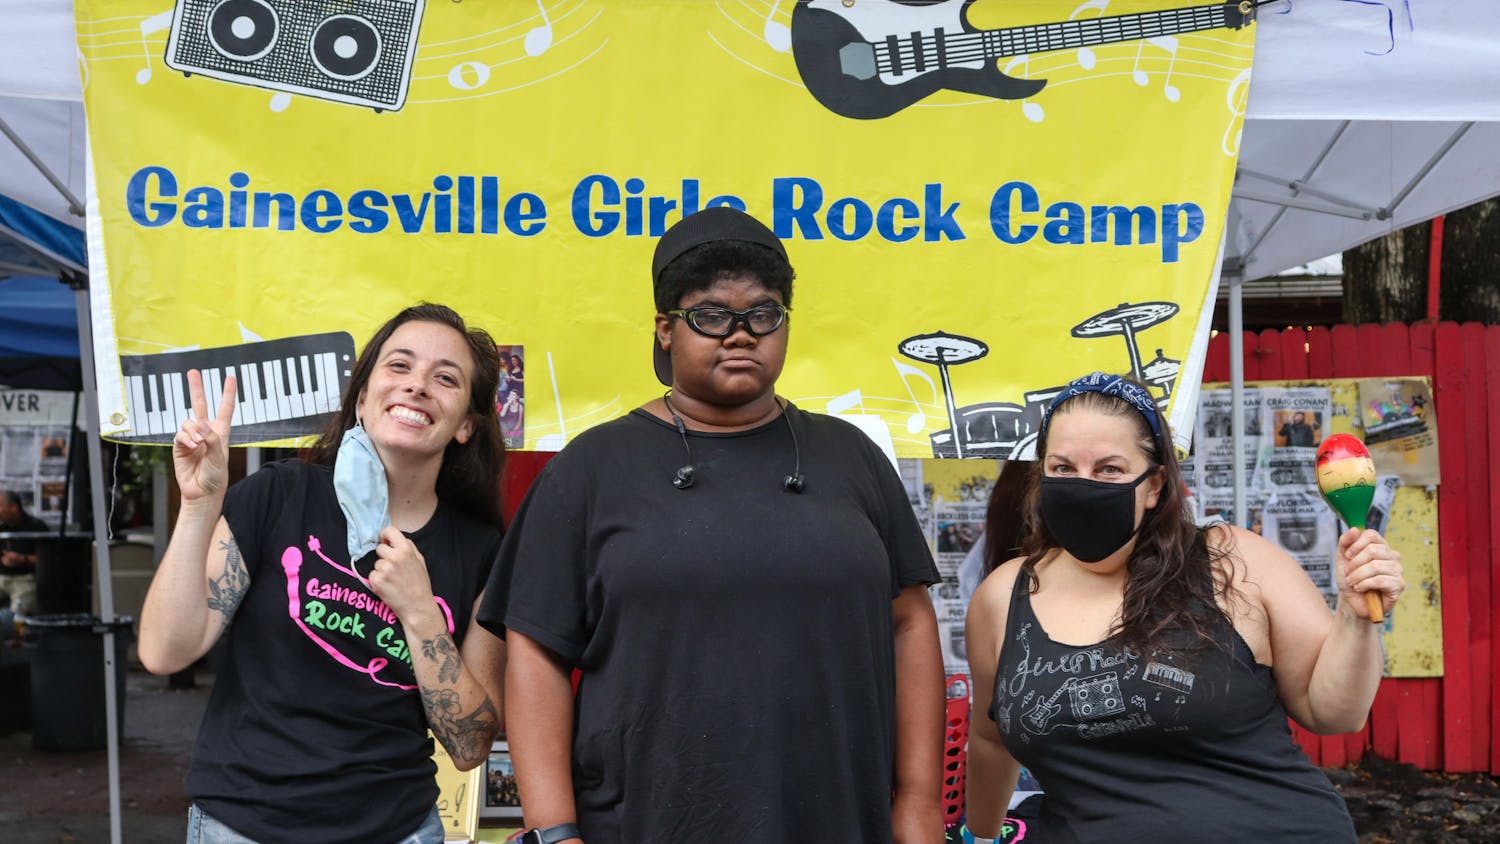 (Left to right) Coral Smith, Charlotte Katz Howick and Jennifer Vito stood in front of the information booth on Saturday. Howick was a previous camper of Gainesville Girls Rock Camp.